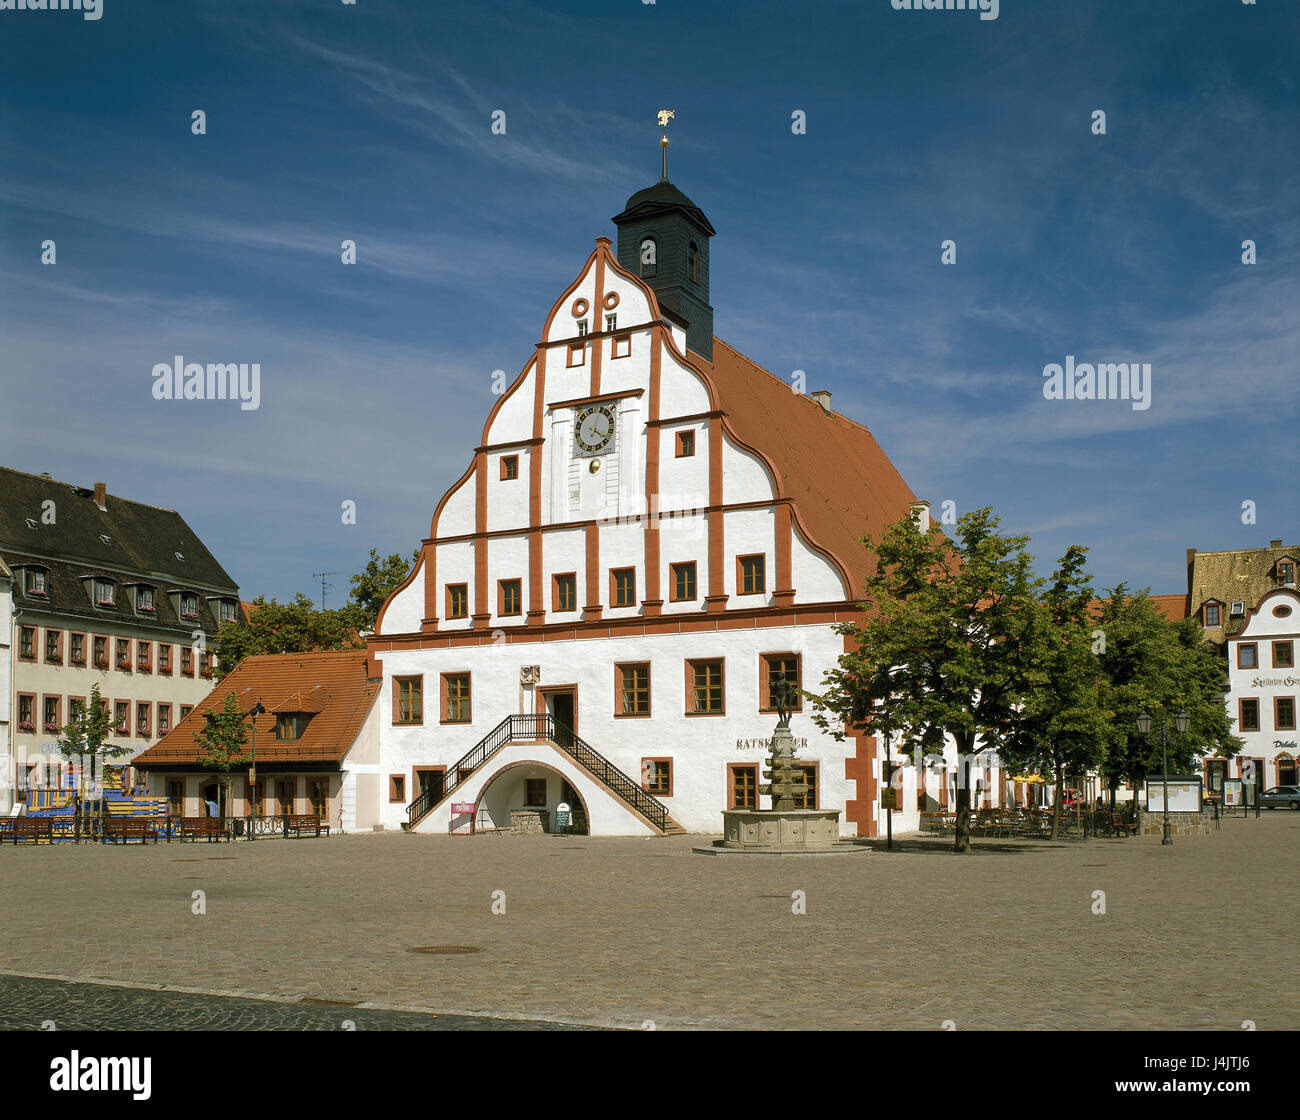 Germany, Saxony, Grimma, marketplace, city hall Europe, hollow talc rice, local view, rathskeller, building, structure, architecture, architectural style, Renaissance, place of interest, outside Stock Photo